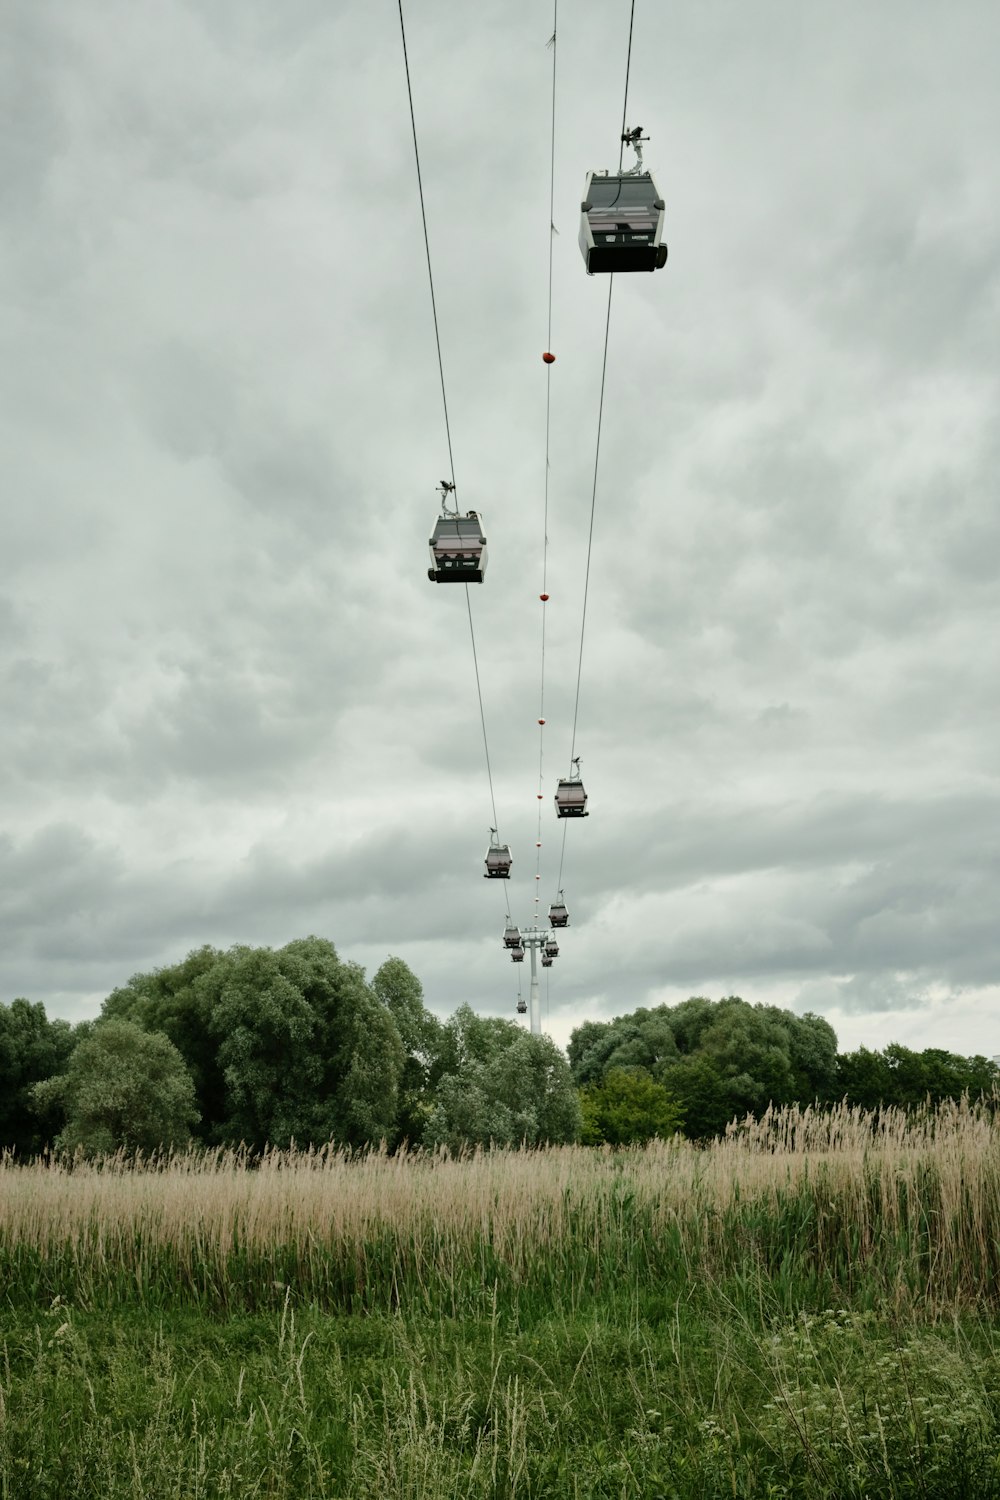 a group of people riding a ski lift over a lush green field